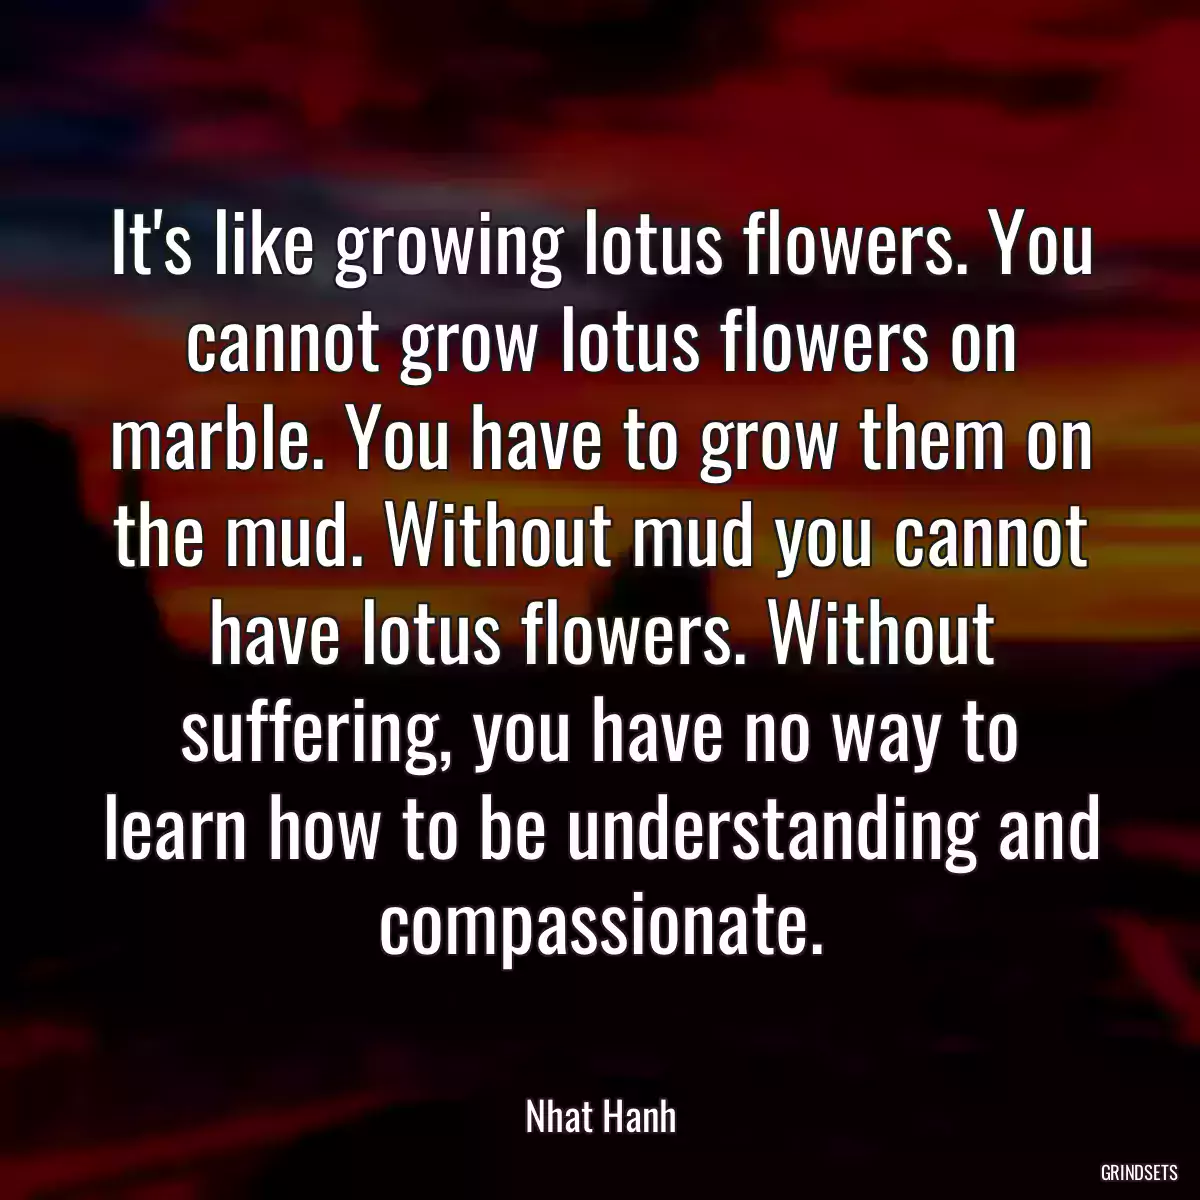 It\'s like growing lotus flowers. You cannot grow lotus flowers on marble. You have to grow them on the mud. Without mud you cannot have lotus flowers. Without suffering, you have no way to learn how to be understanding and compassionate.